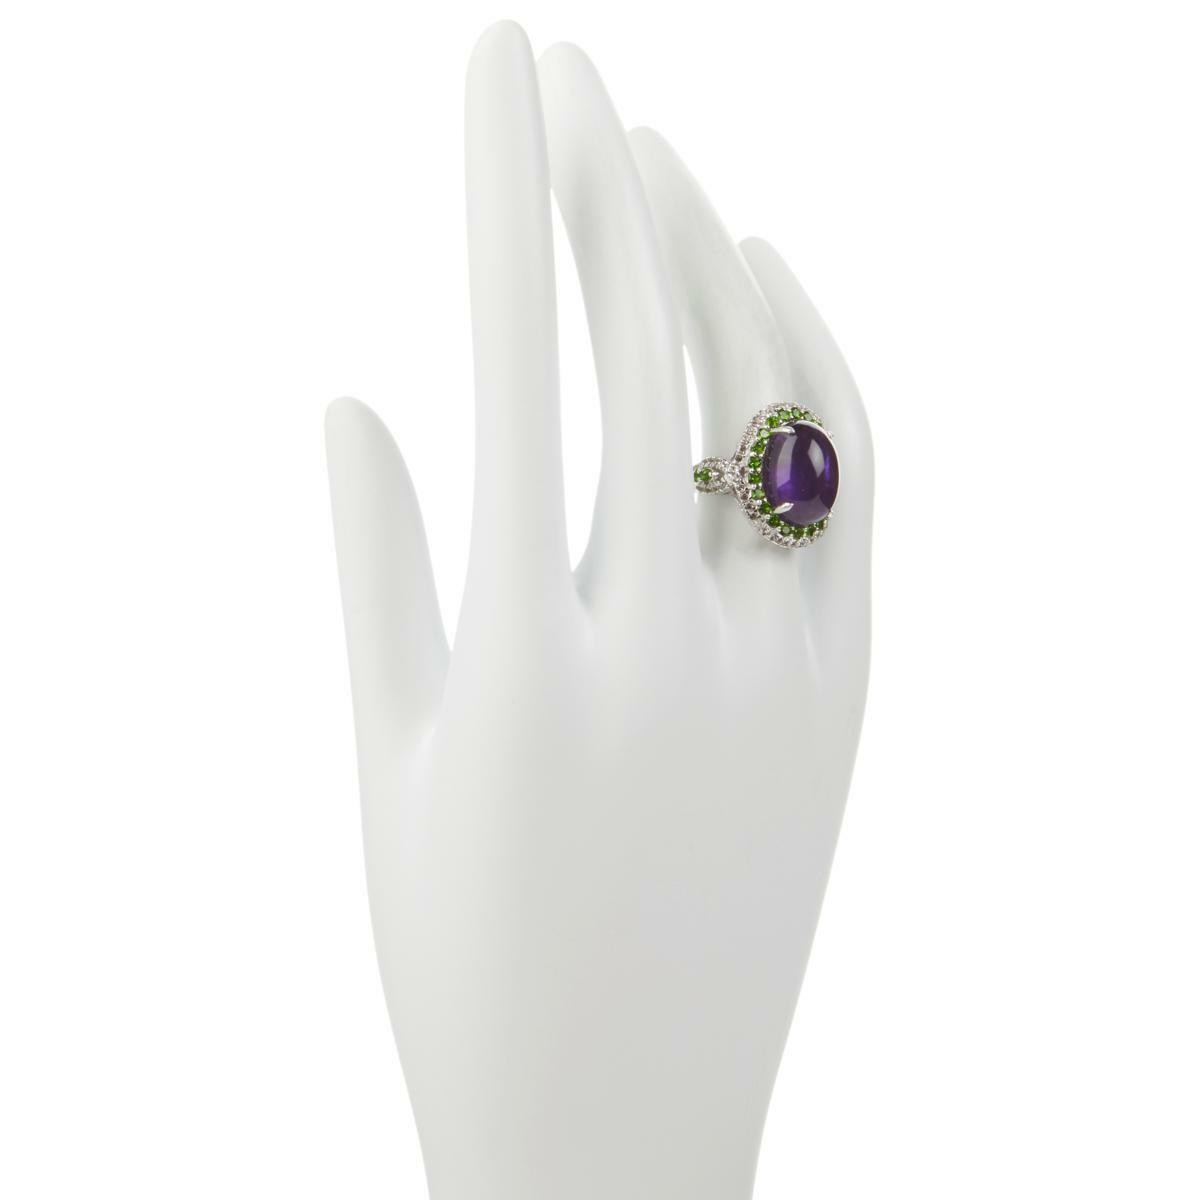 Colleen Lopez Amethyst, Chrome Diopside and White Topaz Ring, Size 7